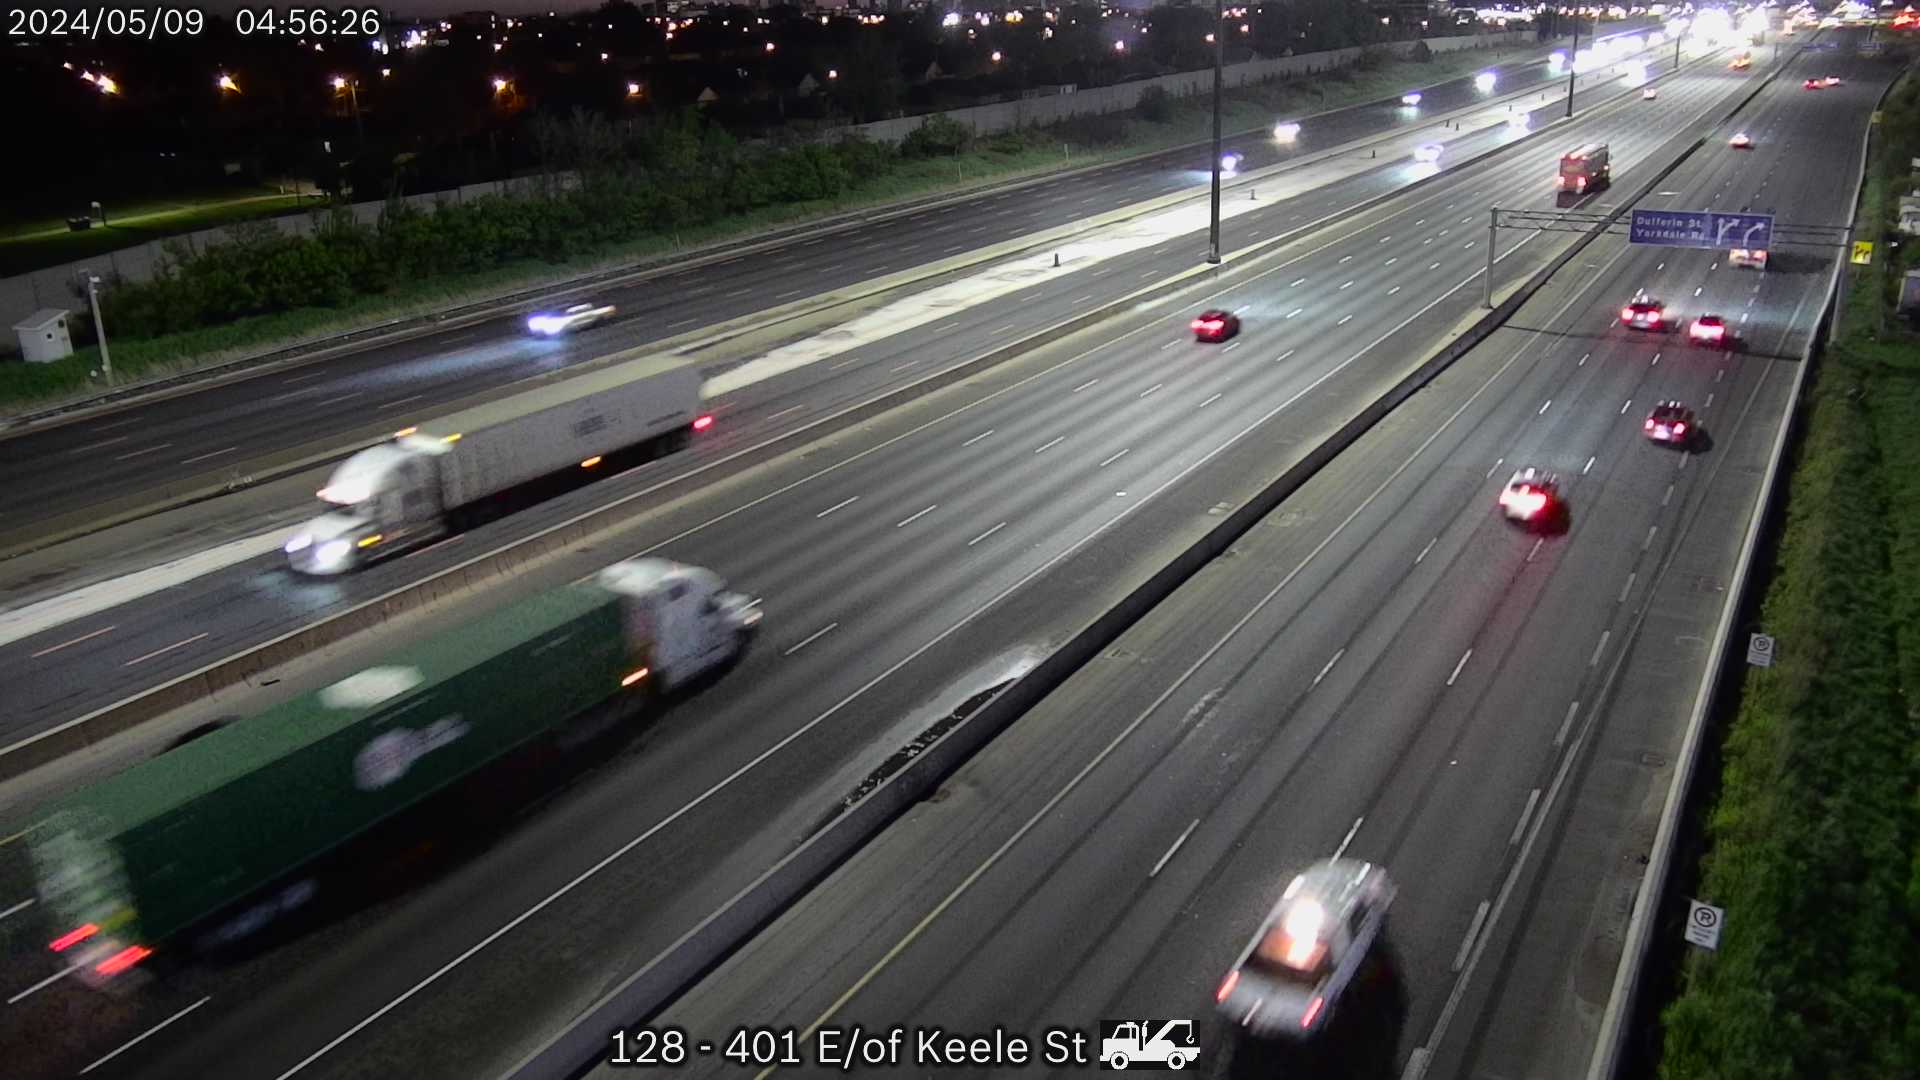 Webcam of South side of Highway 401 near Keele Street courtesy of the MTO